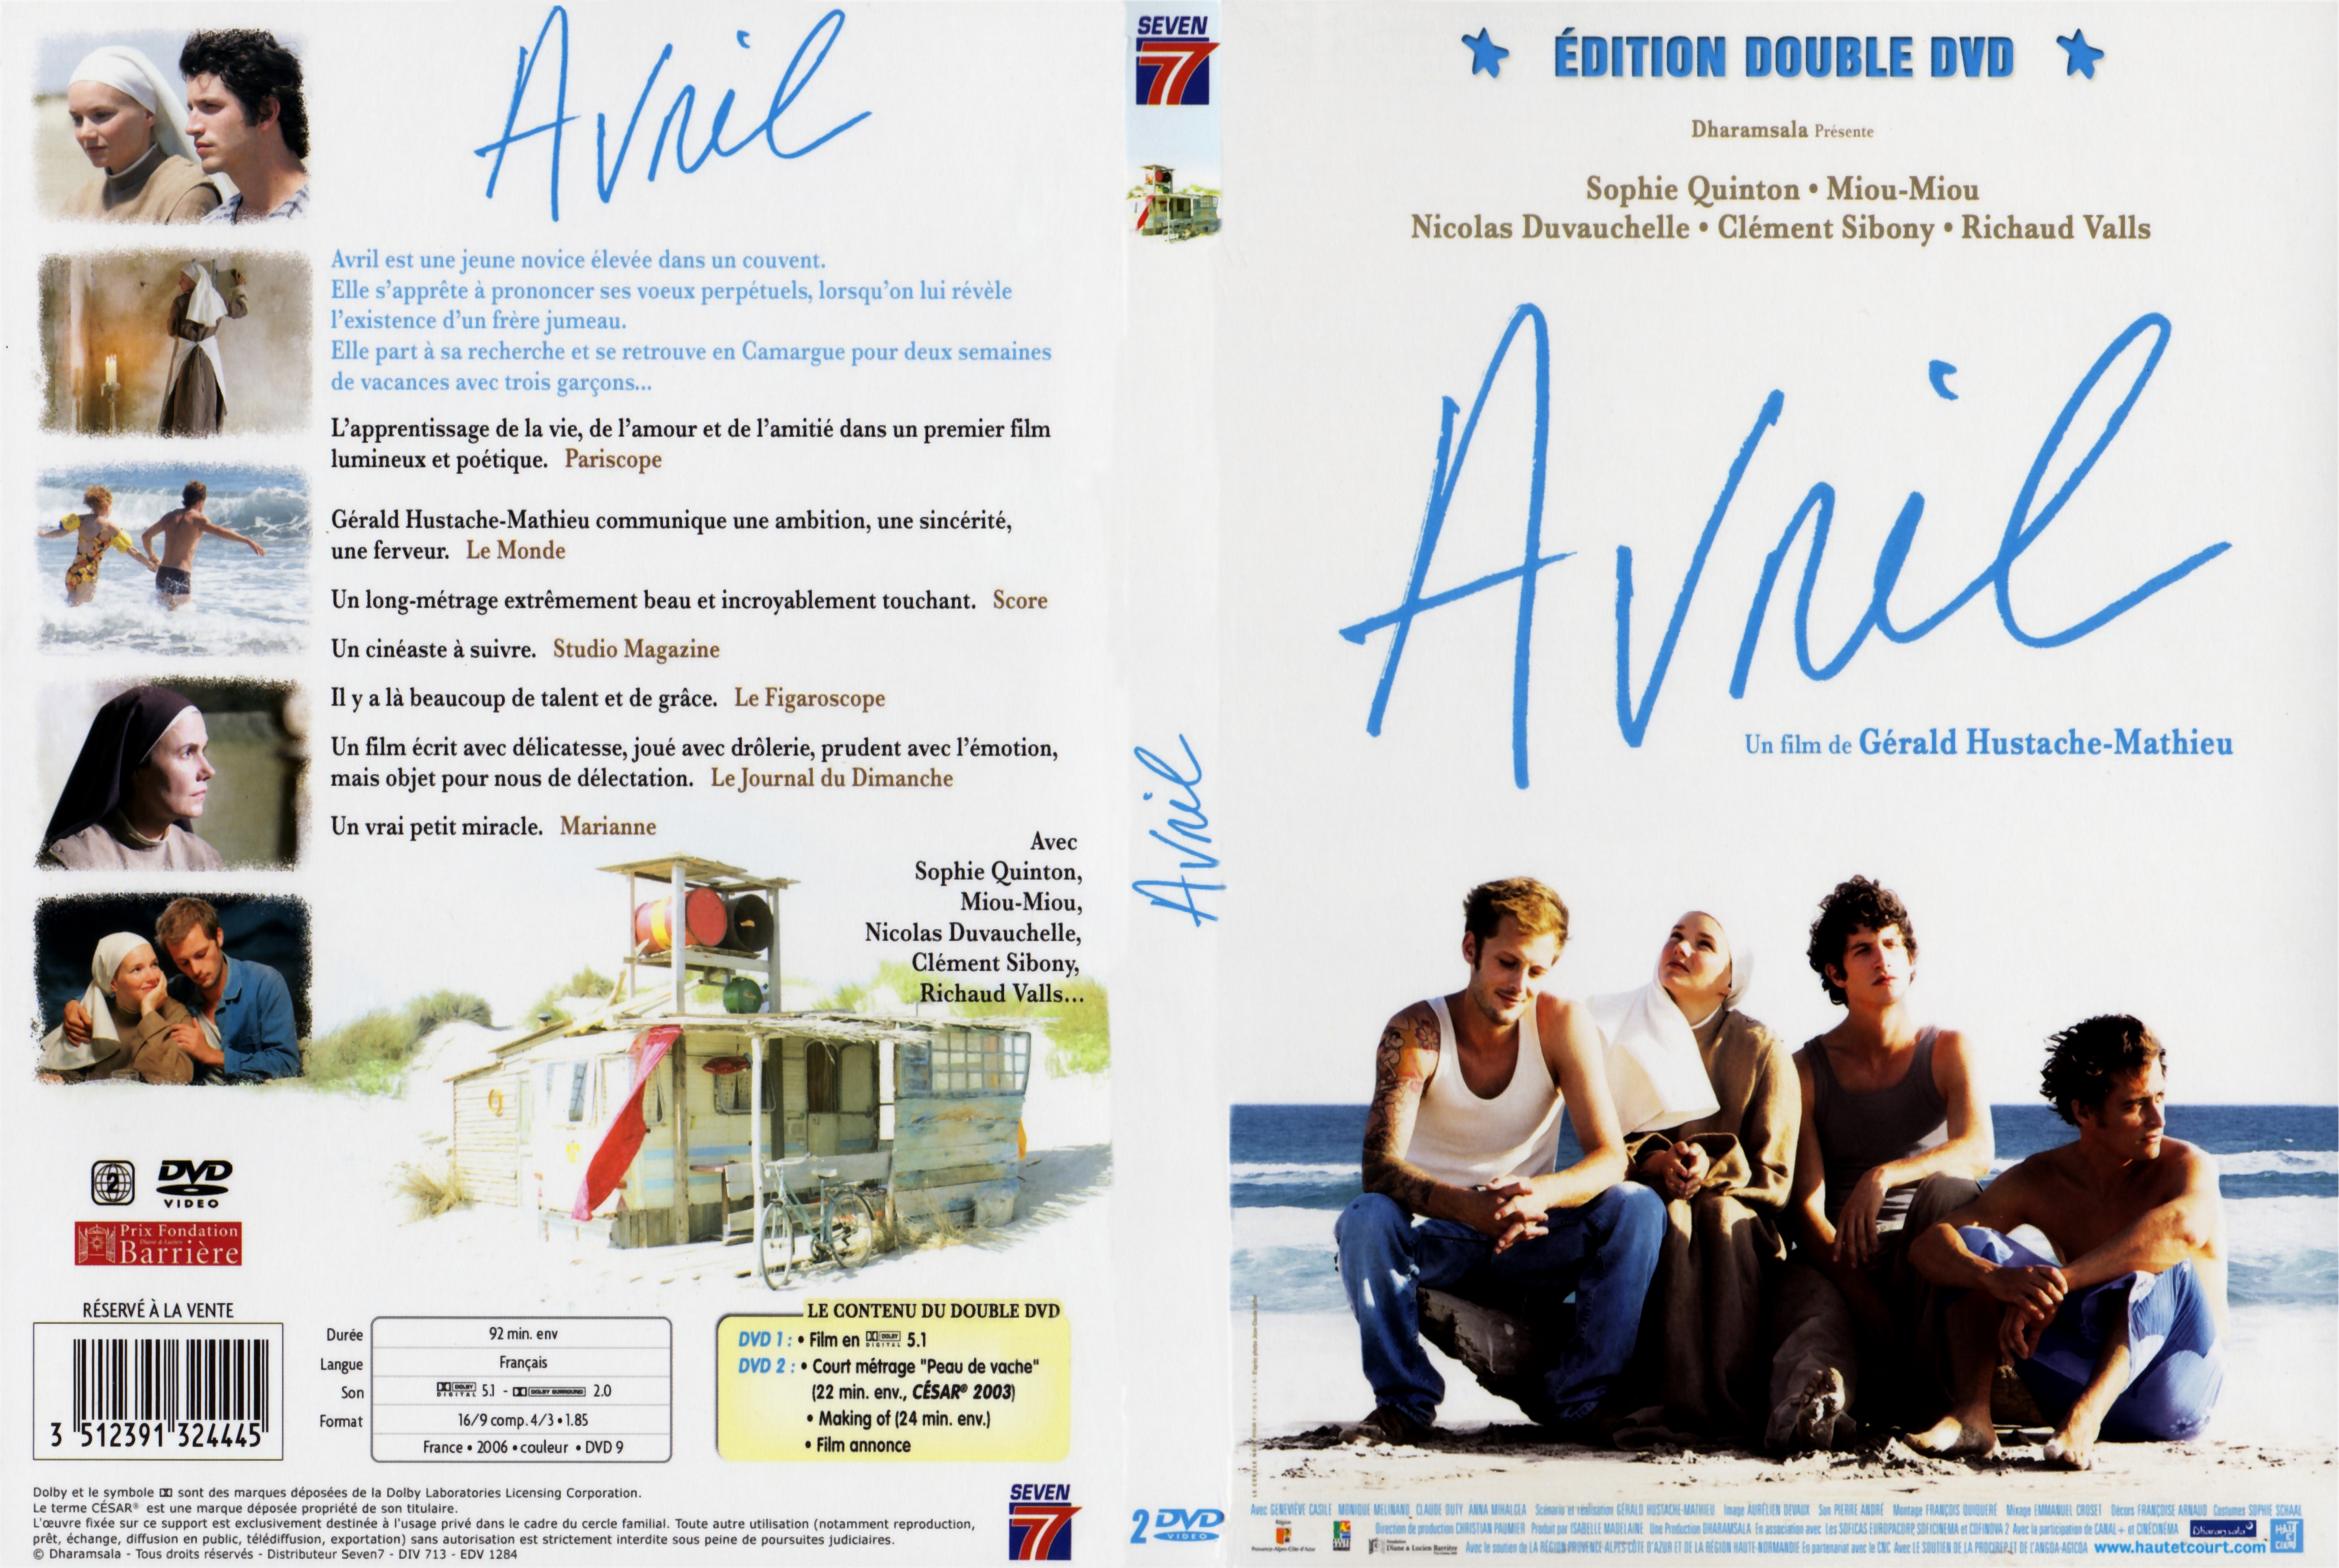 Jaquette DVD Avril